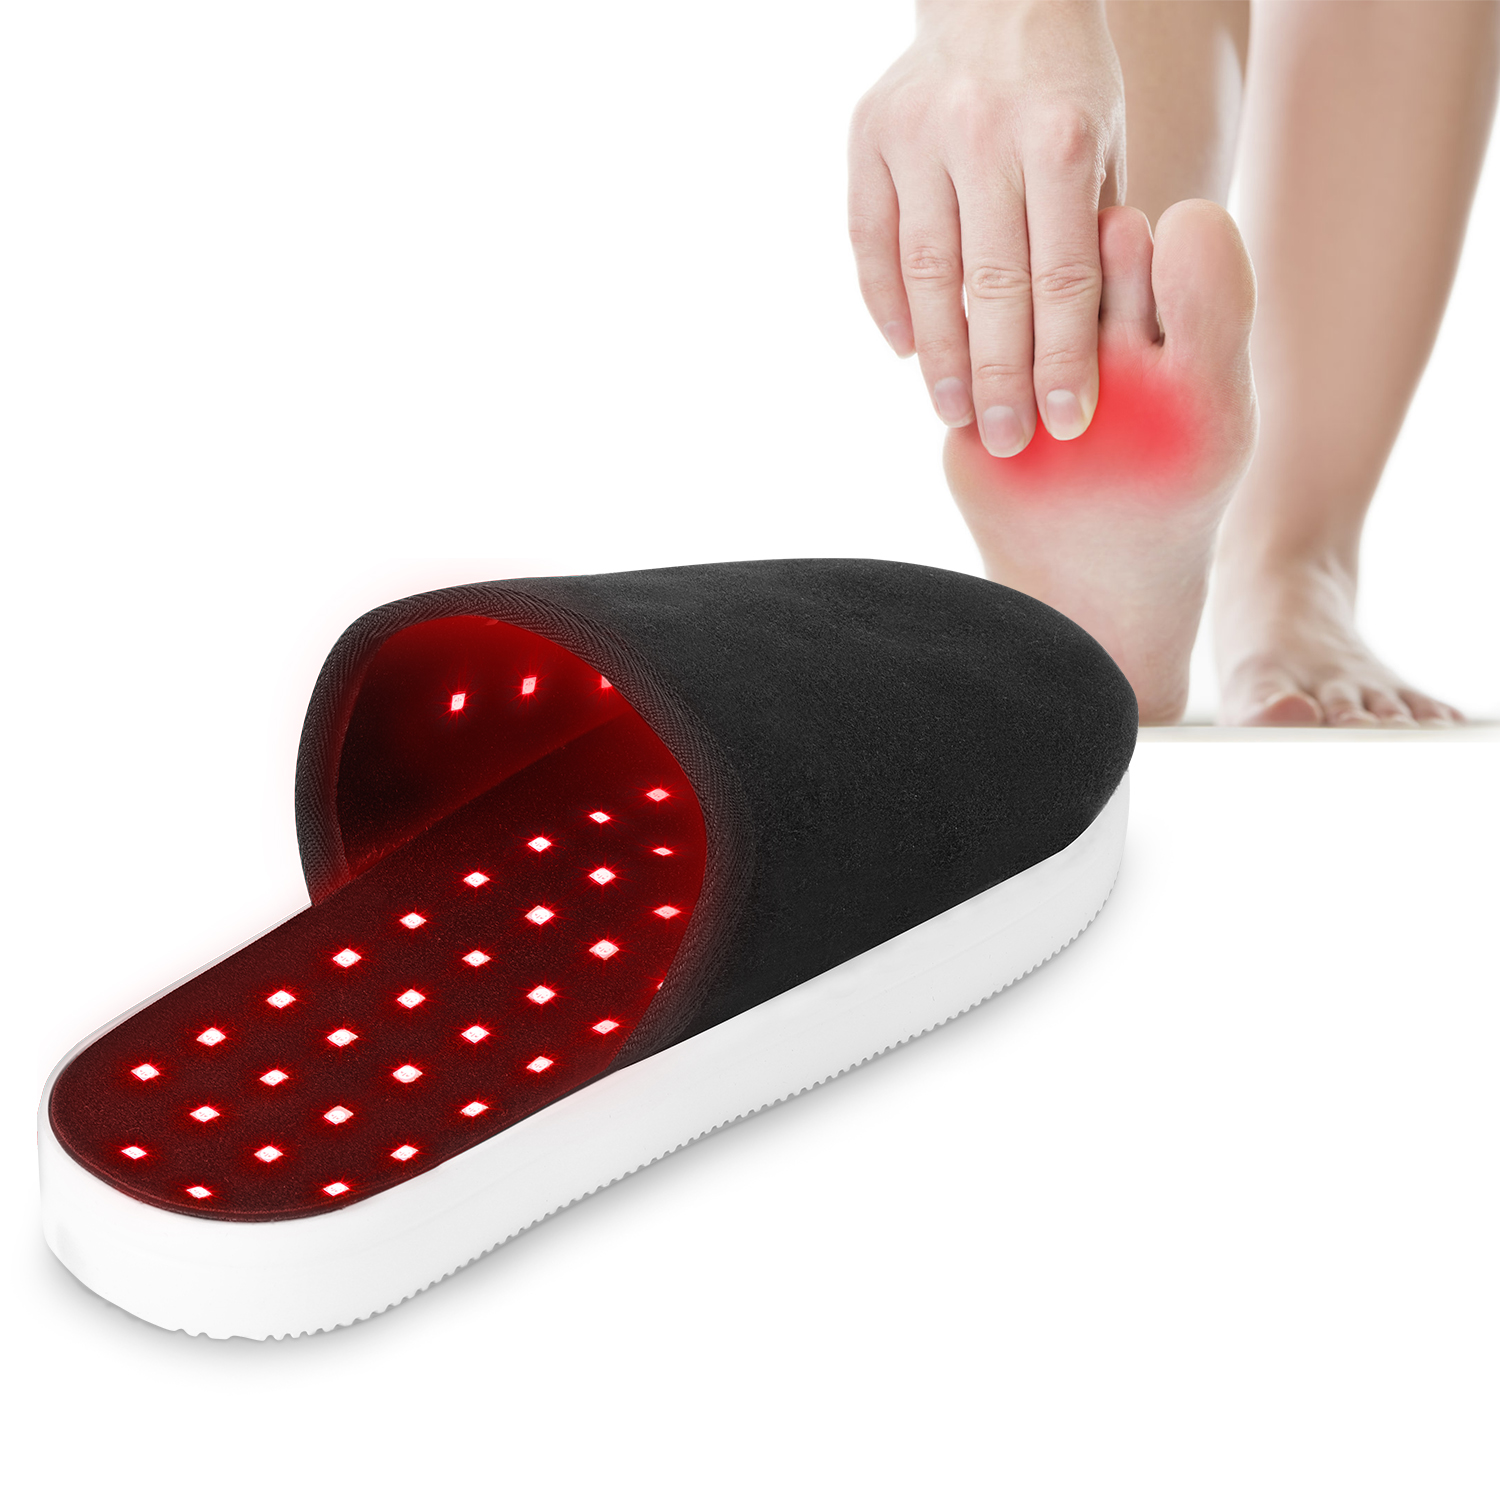 China Red Light Therapy Slipper manufacturers - Kinreen